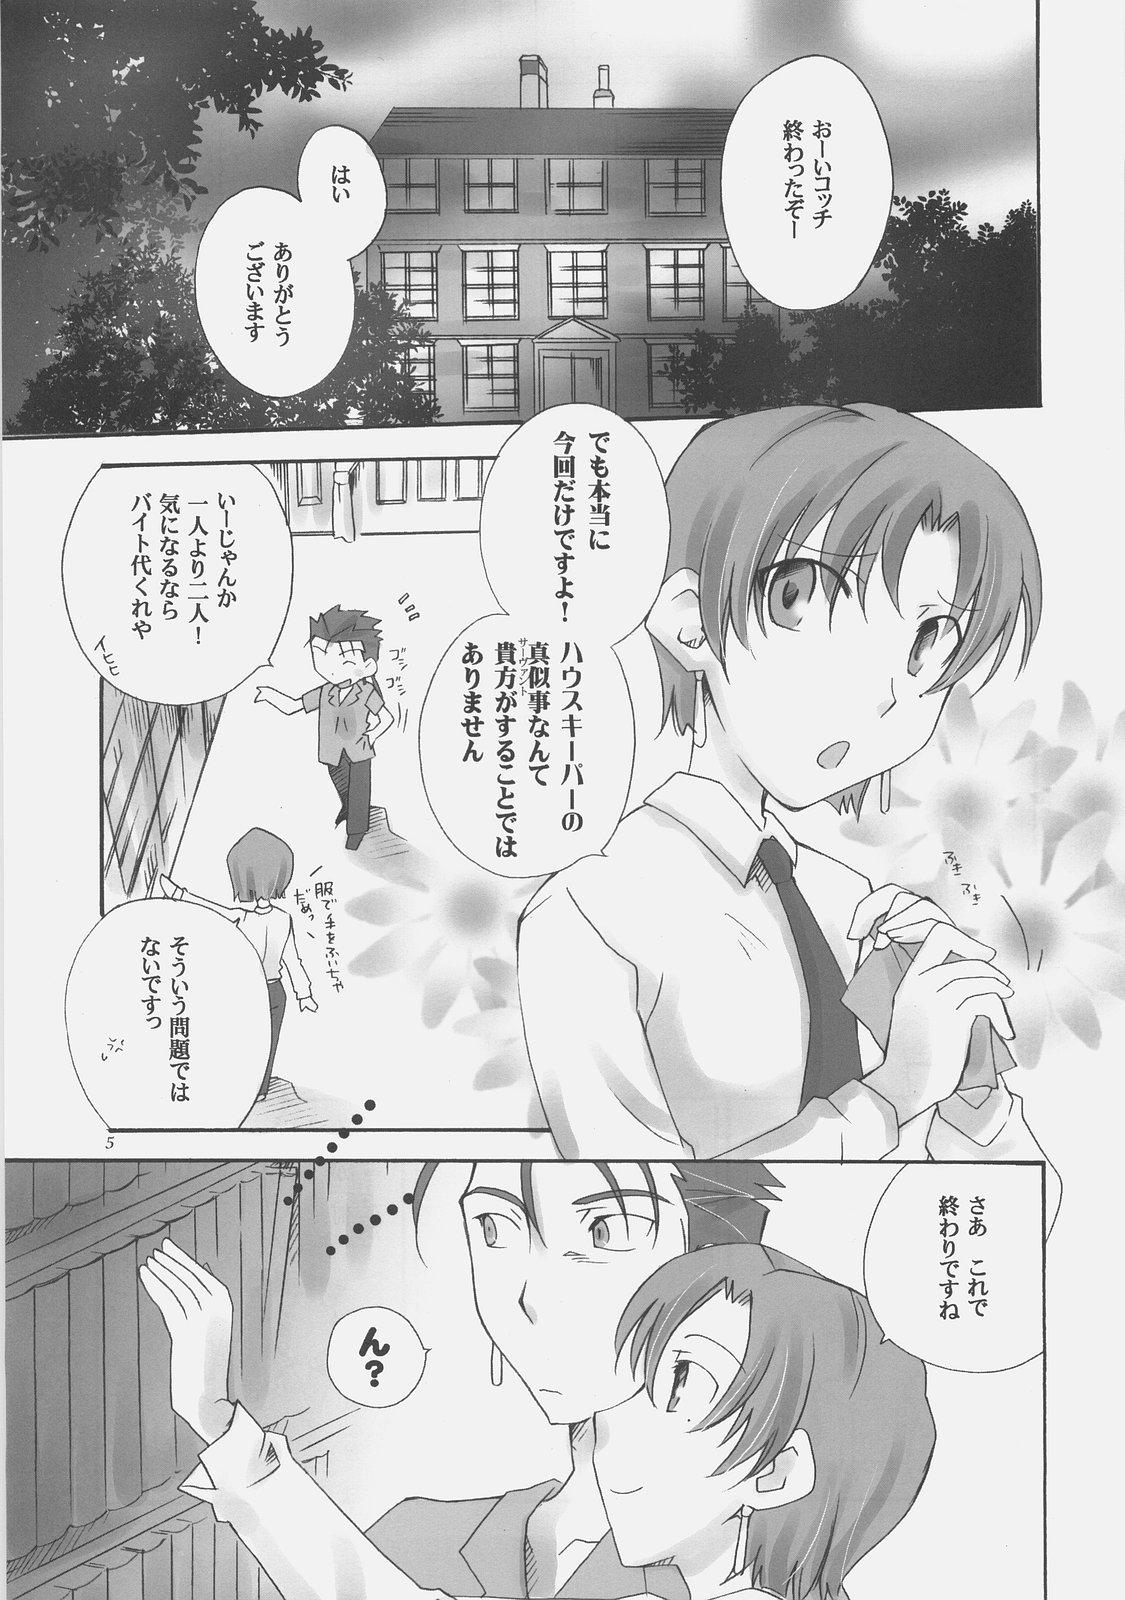 Girl Sucking Dick Secret Mission - Fate hollow ataraxia Gay Averagedick - Page 3